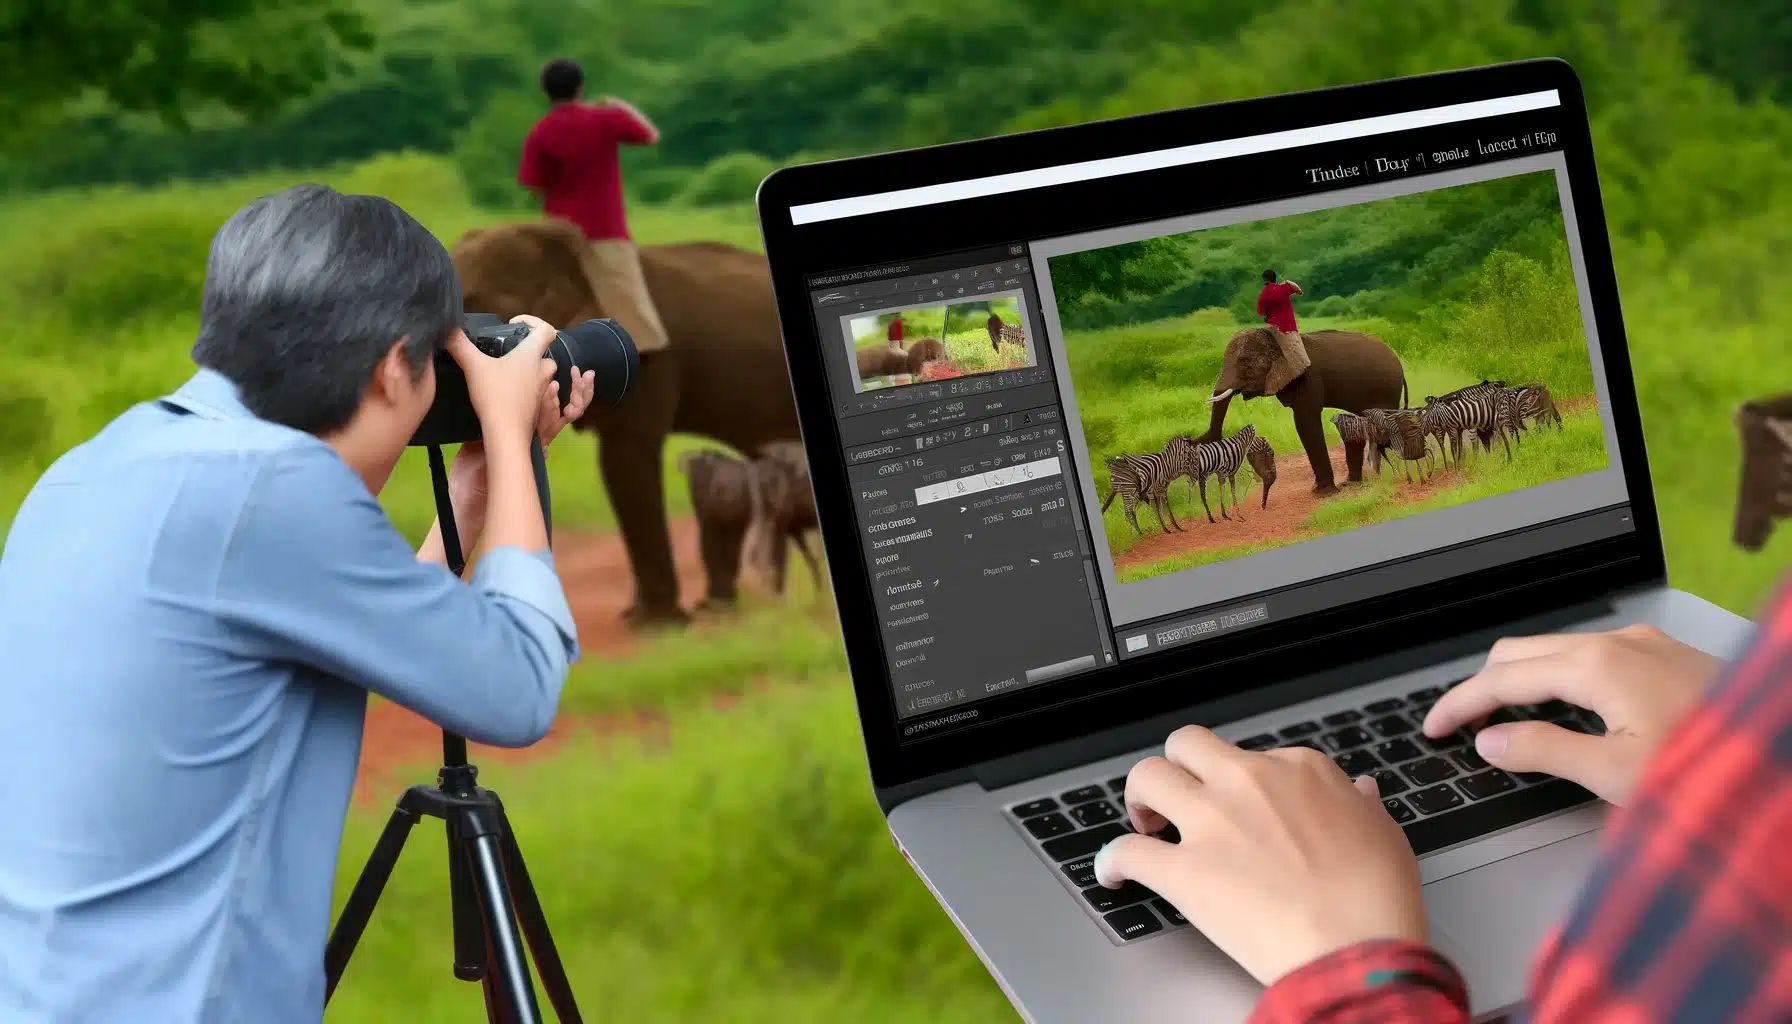 One person capturing wildlife with a camera and another editing the photos on a laptop, set in a natural environment, demonstrating the photo editing process.